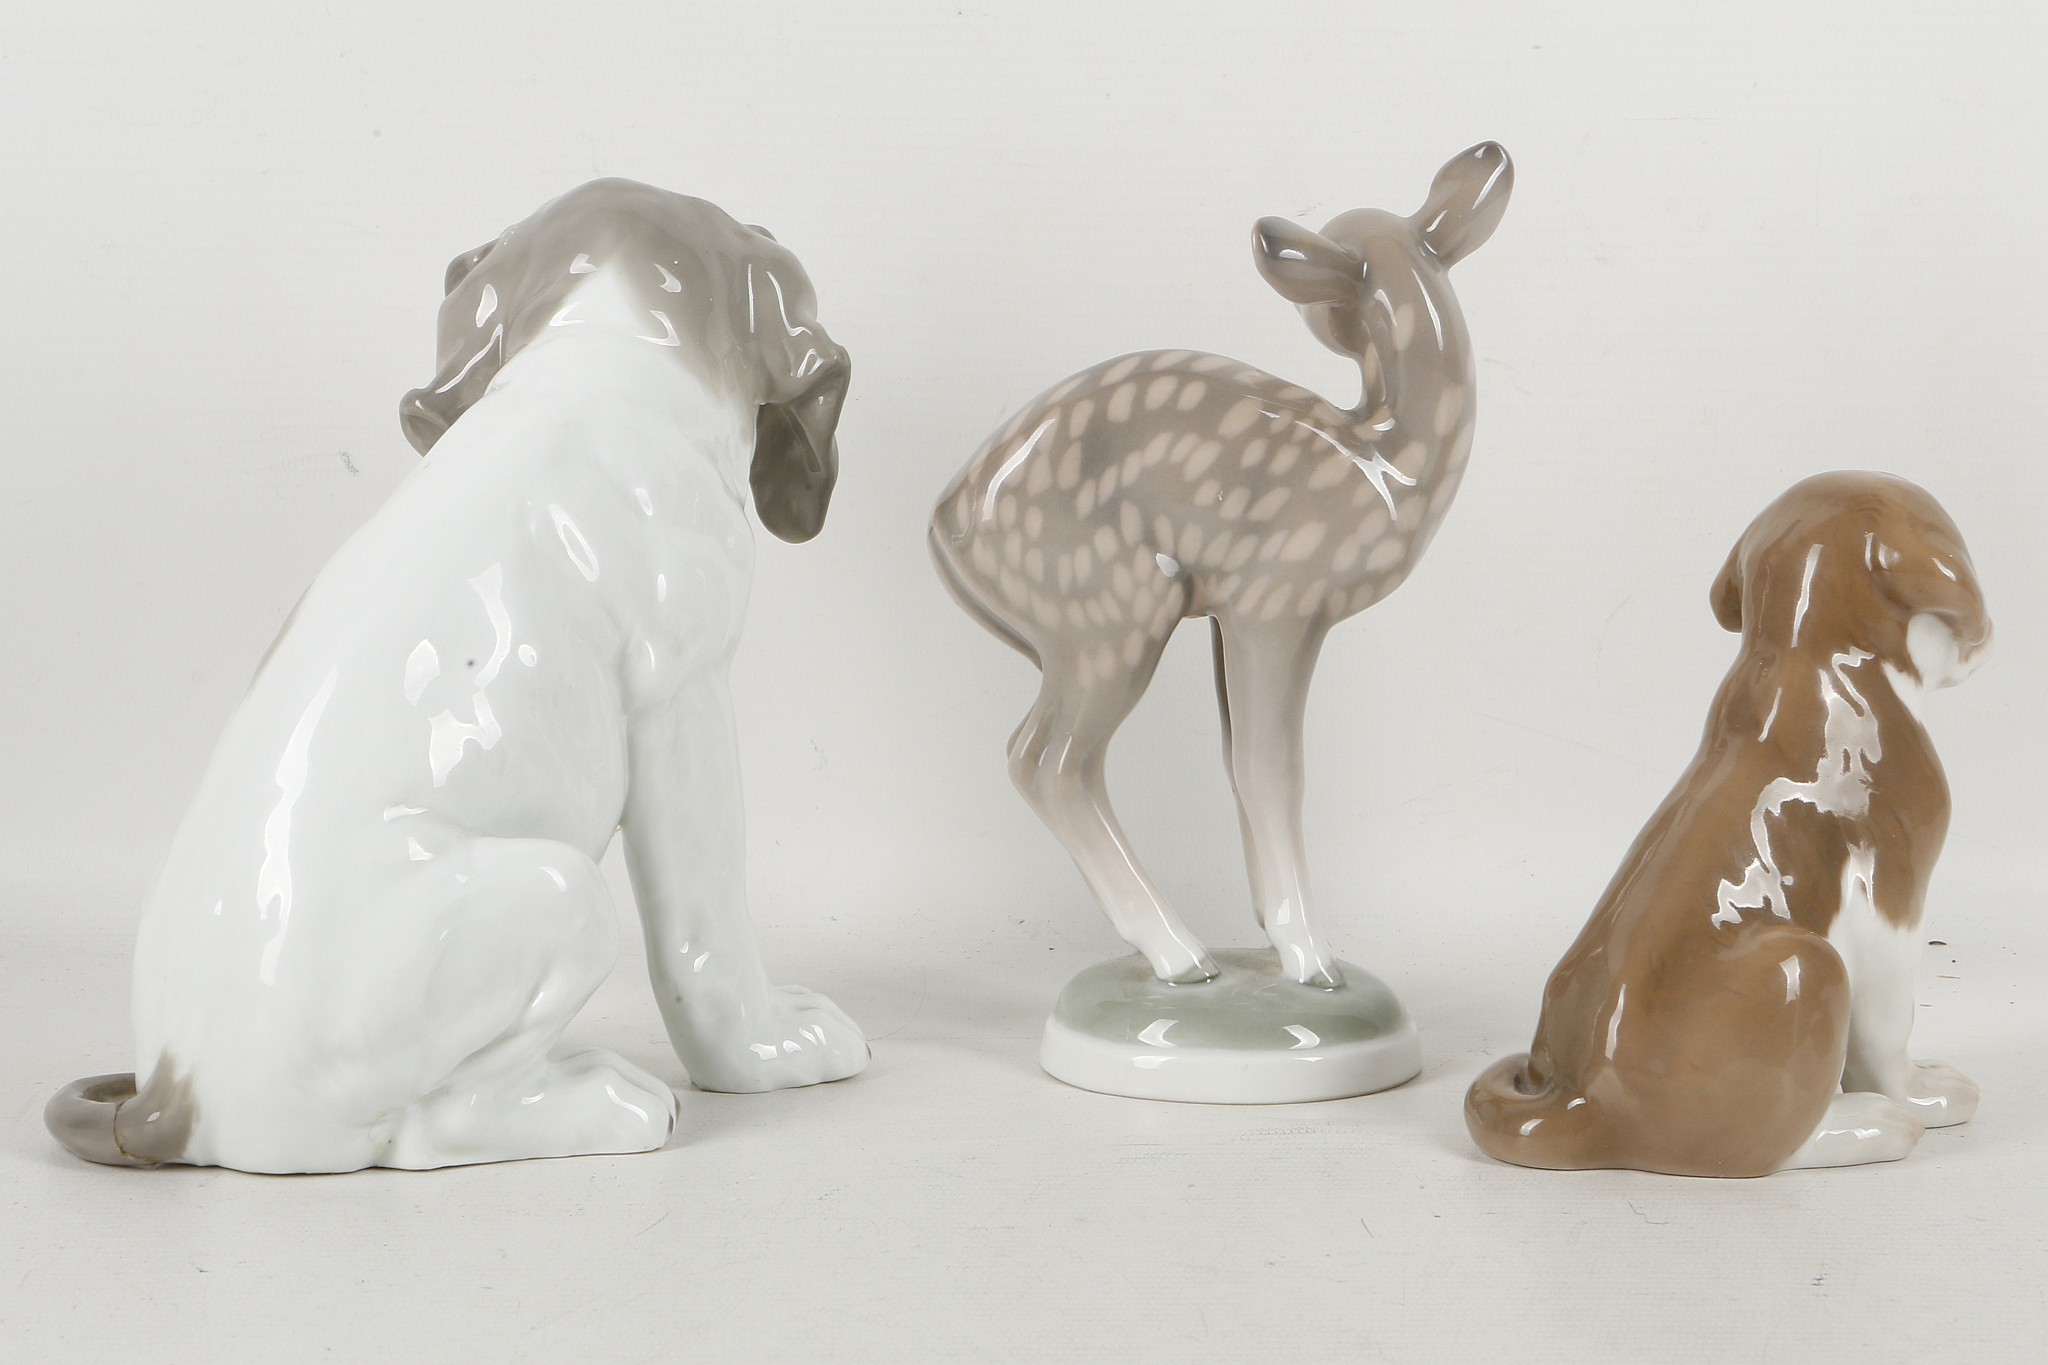 Bing & Groundhal Denmark; studies of a deer, Roebuck fawn, 17.5cm and a seated puppy, 11.8cm and a - Image 2 of 3